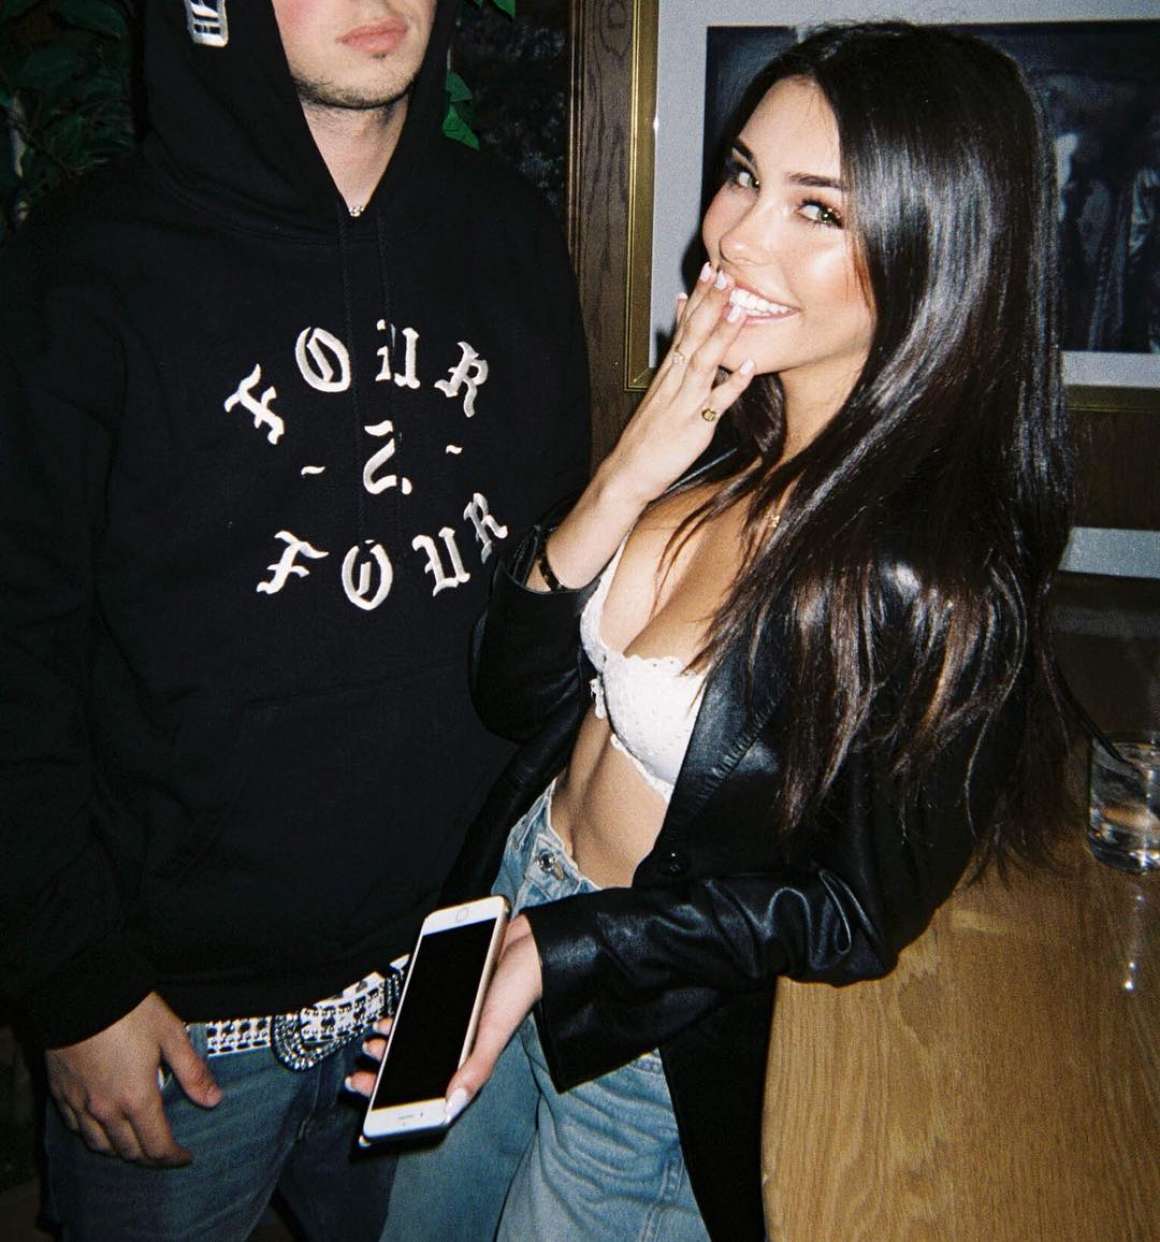 Madison Beer â€“ Personal Pics